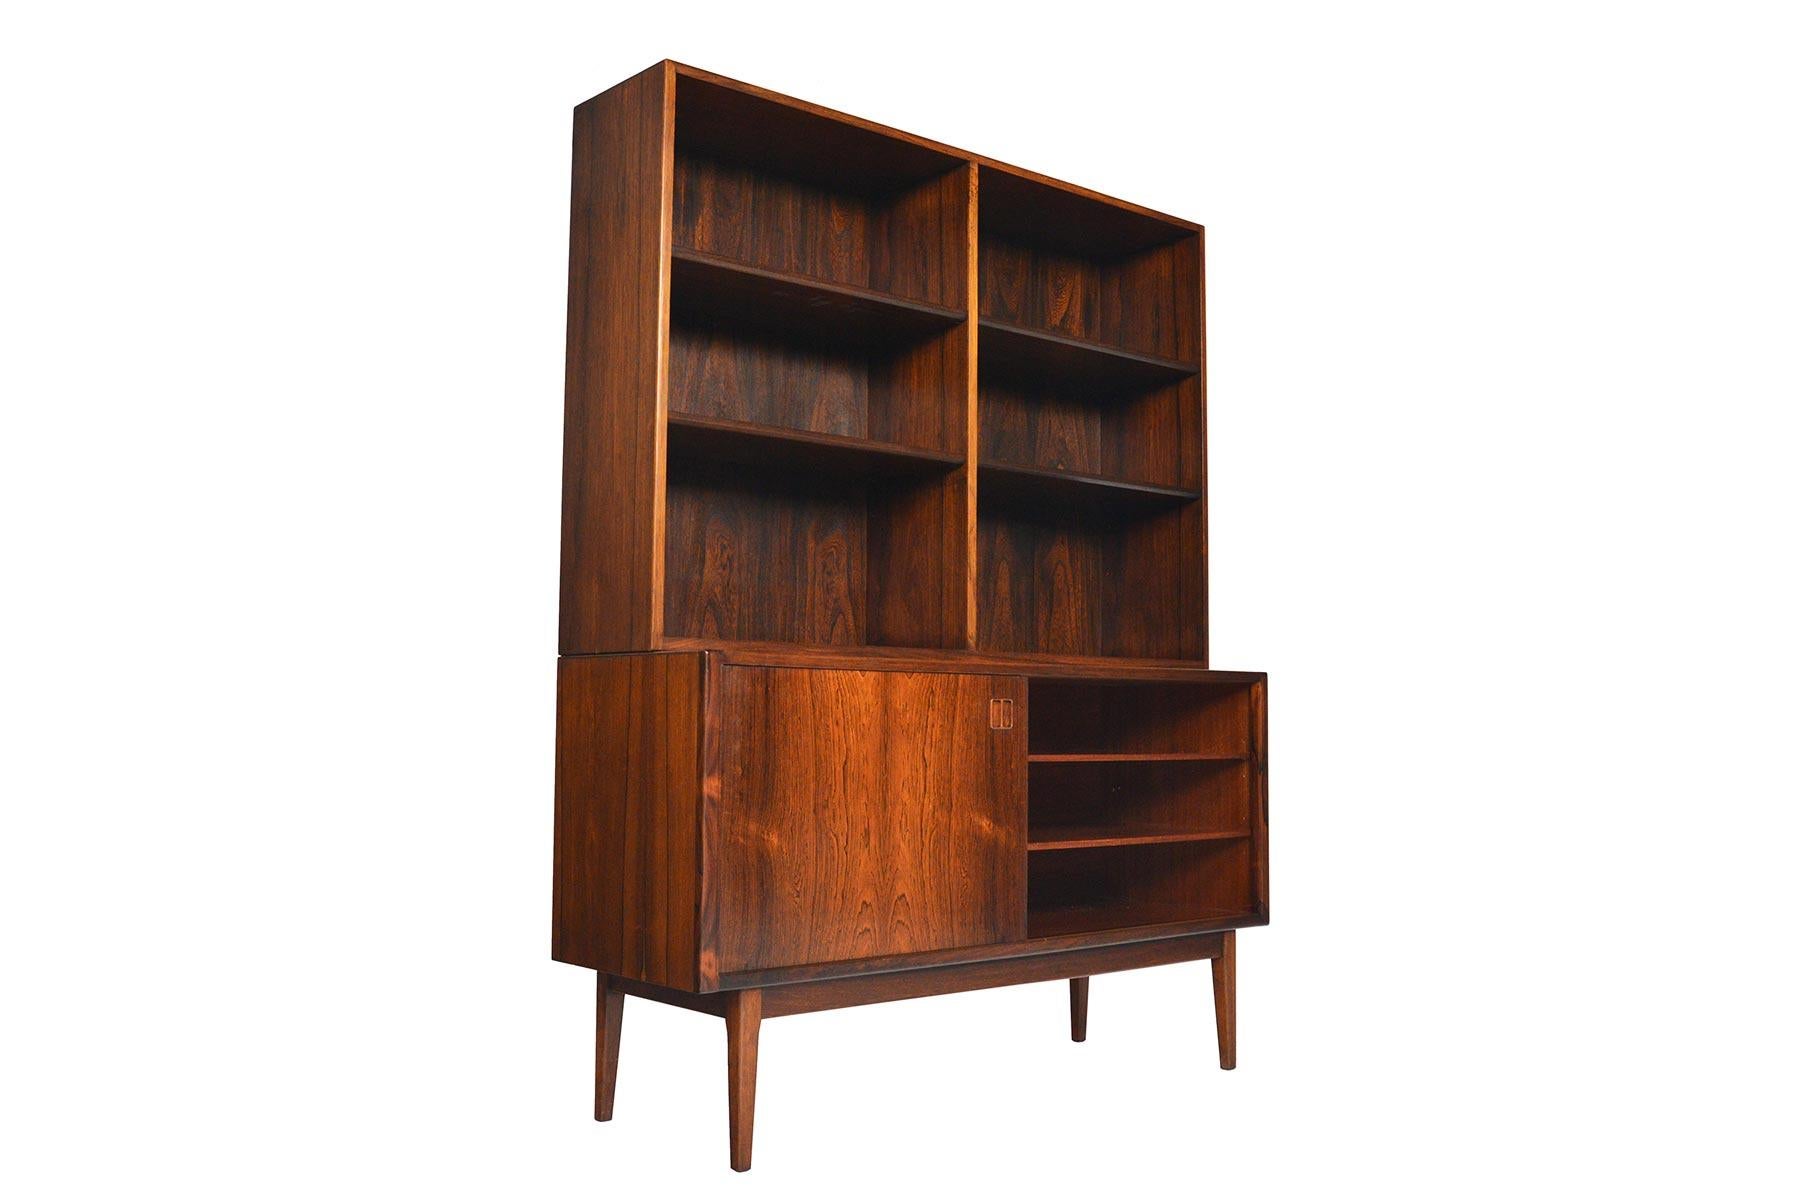 Danish Midcentury Rosewood Credenza with Bookcase Hutch